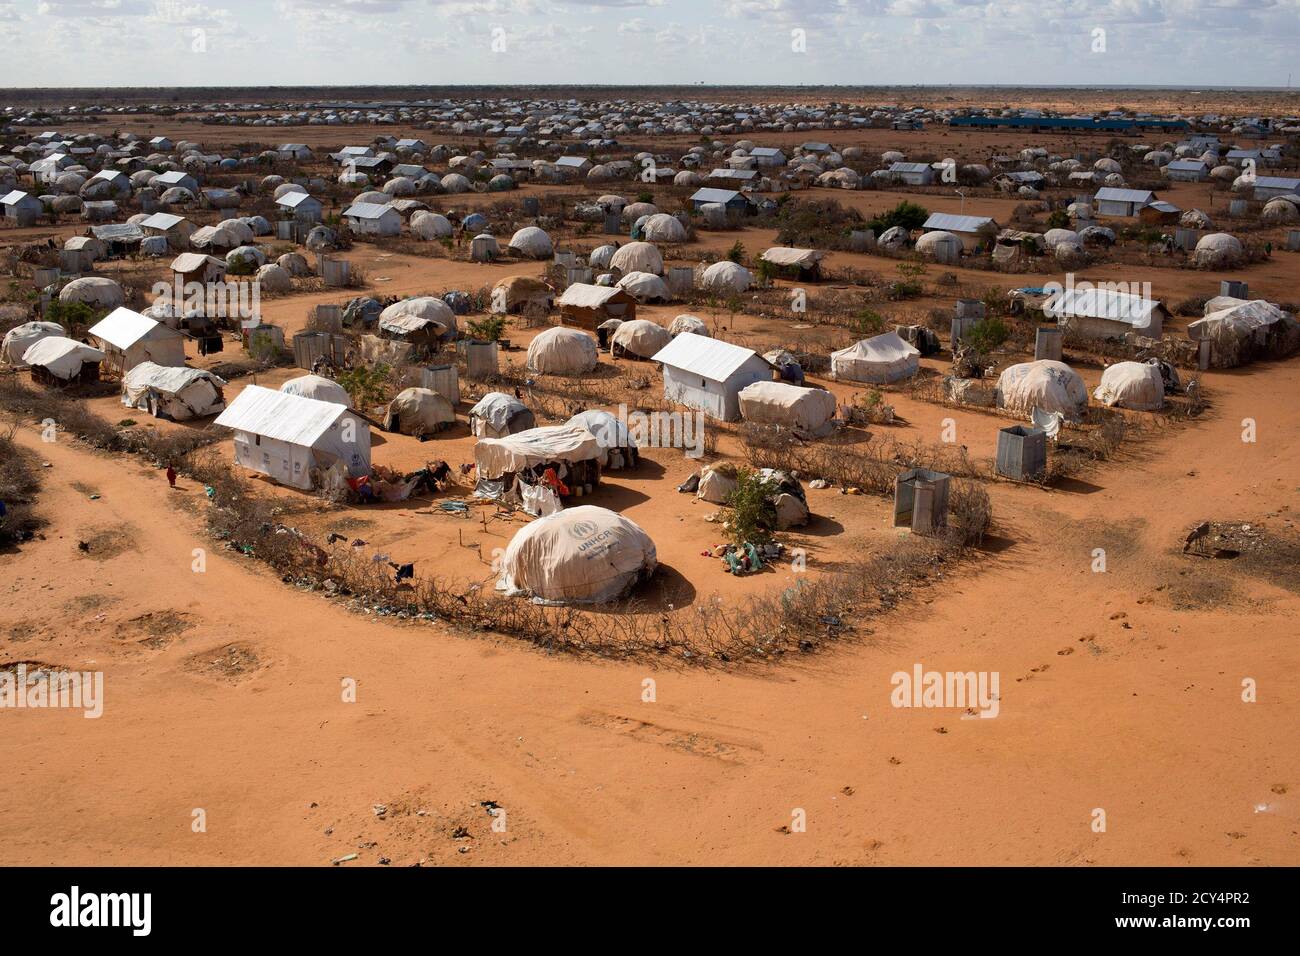 An aerial view shows an extension of the Ifo camp, one of the several refugee settlements in Dadaab, Garissa County, northeastern Kenya, October 7, 2013.   REUTERS/Siegfried Modola  (KENYA - Tags: SOCIETY IMMIGRATION POLITICS) Stock Photo